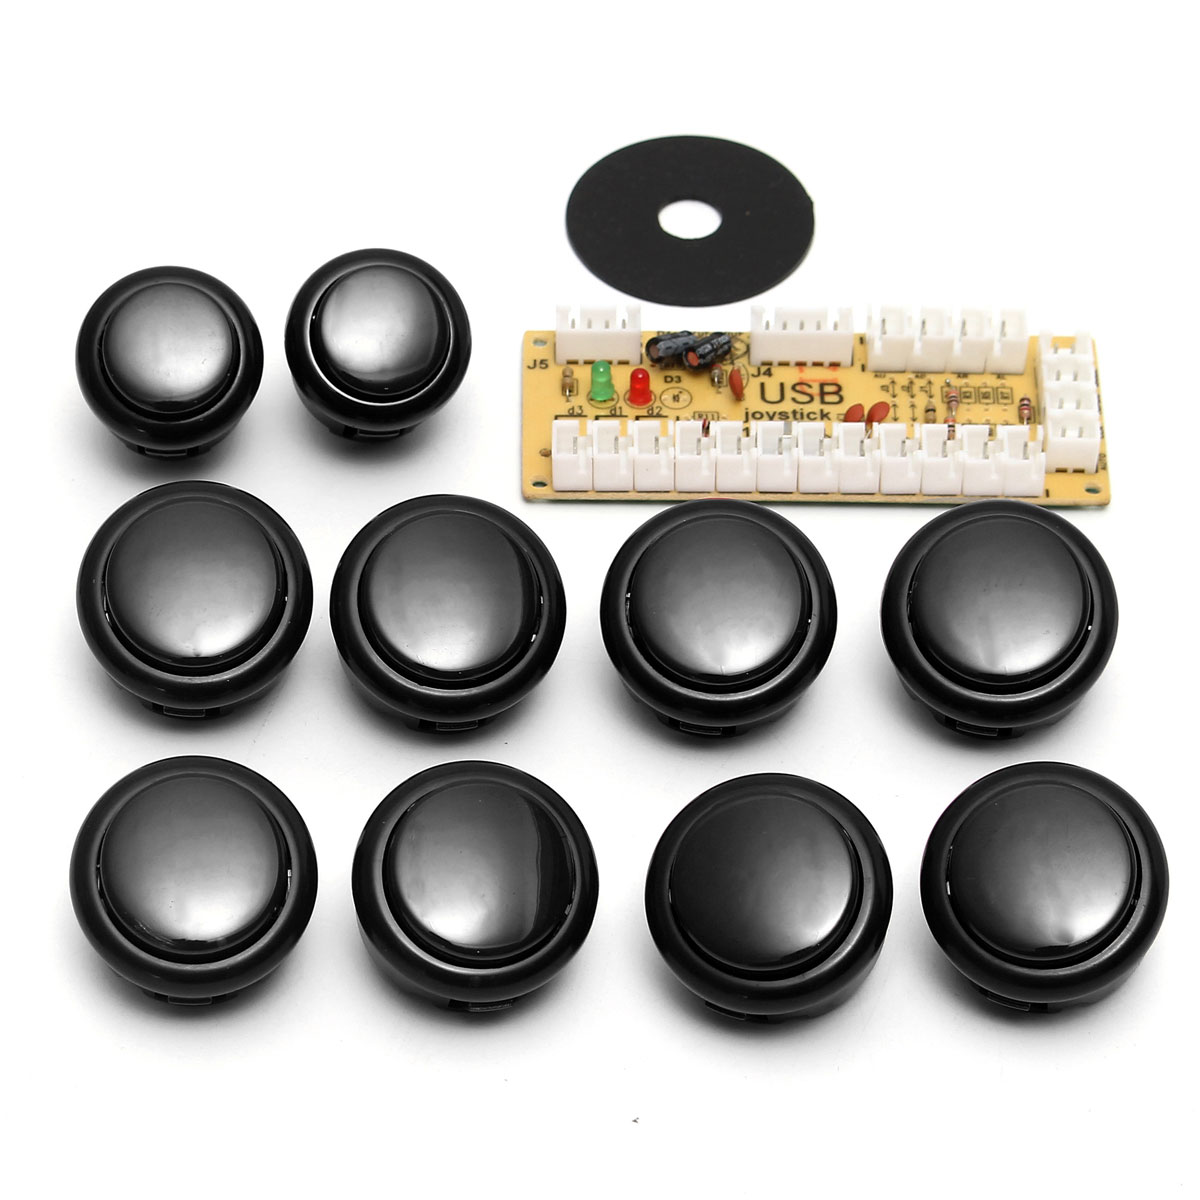 Game DIY Arcade Set Kits Replacement Parts USB Encoder to PC Joystick and Buttons 33